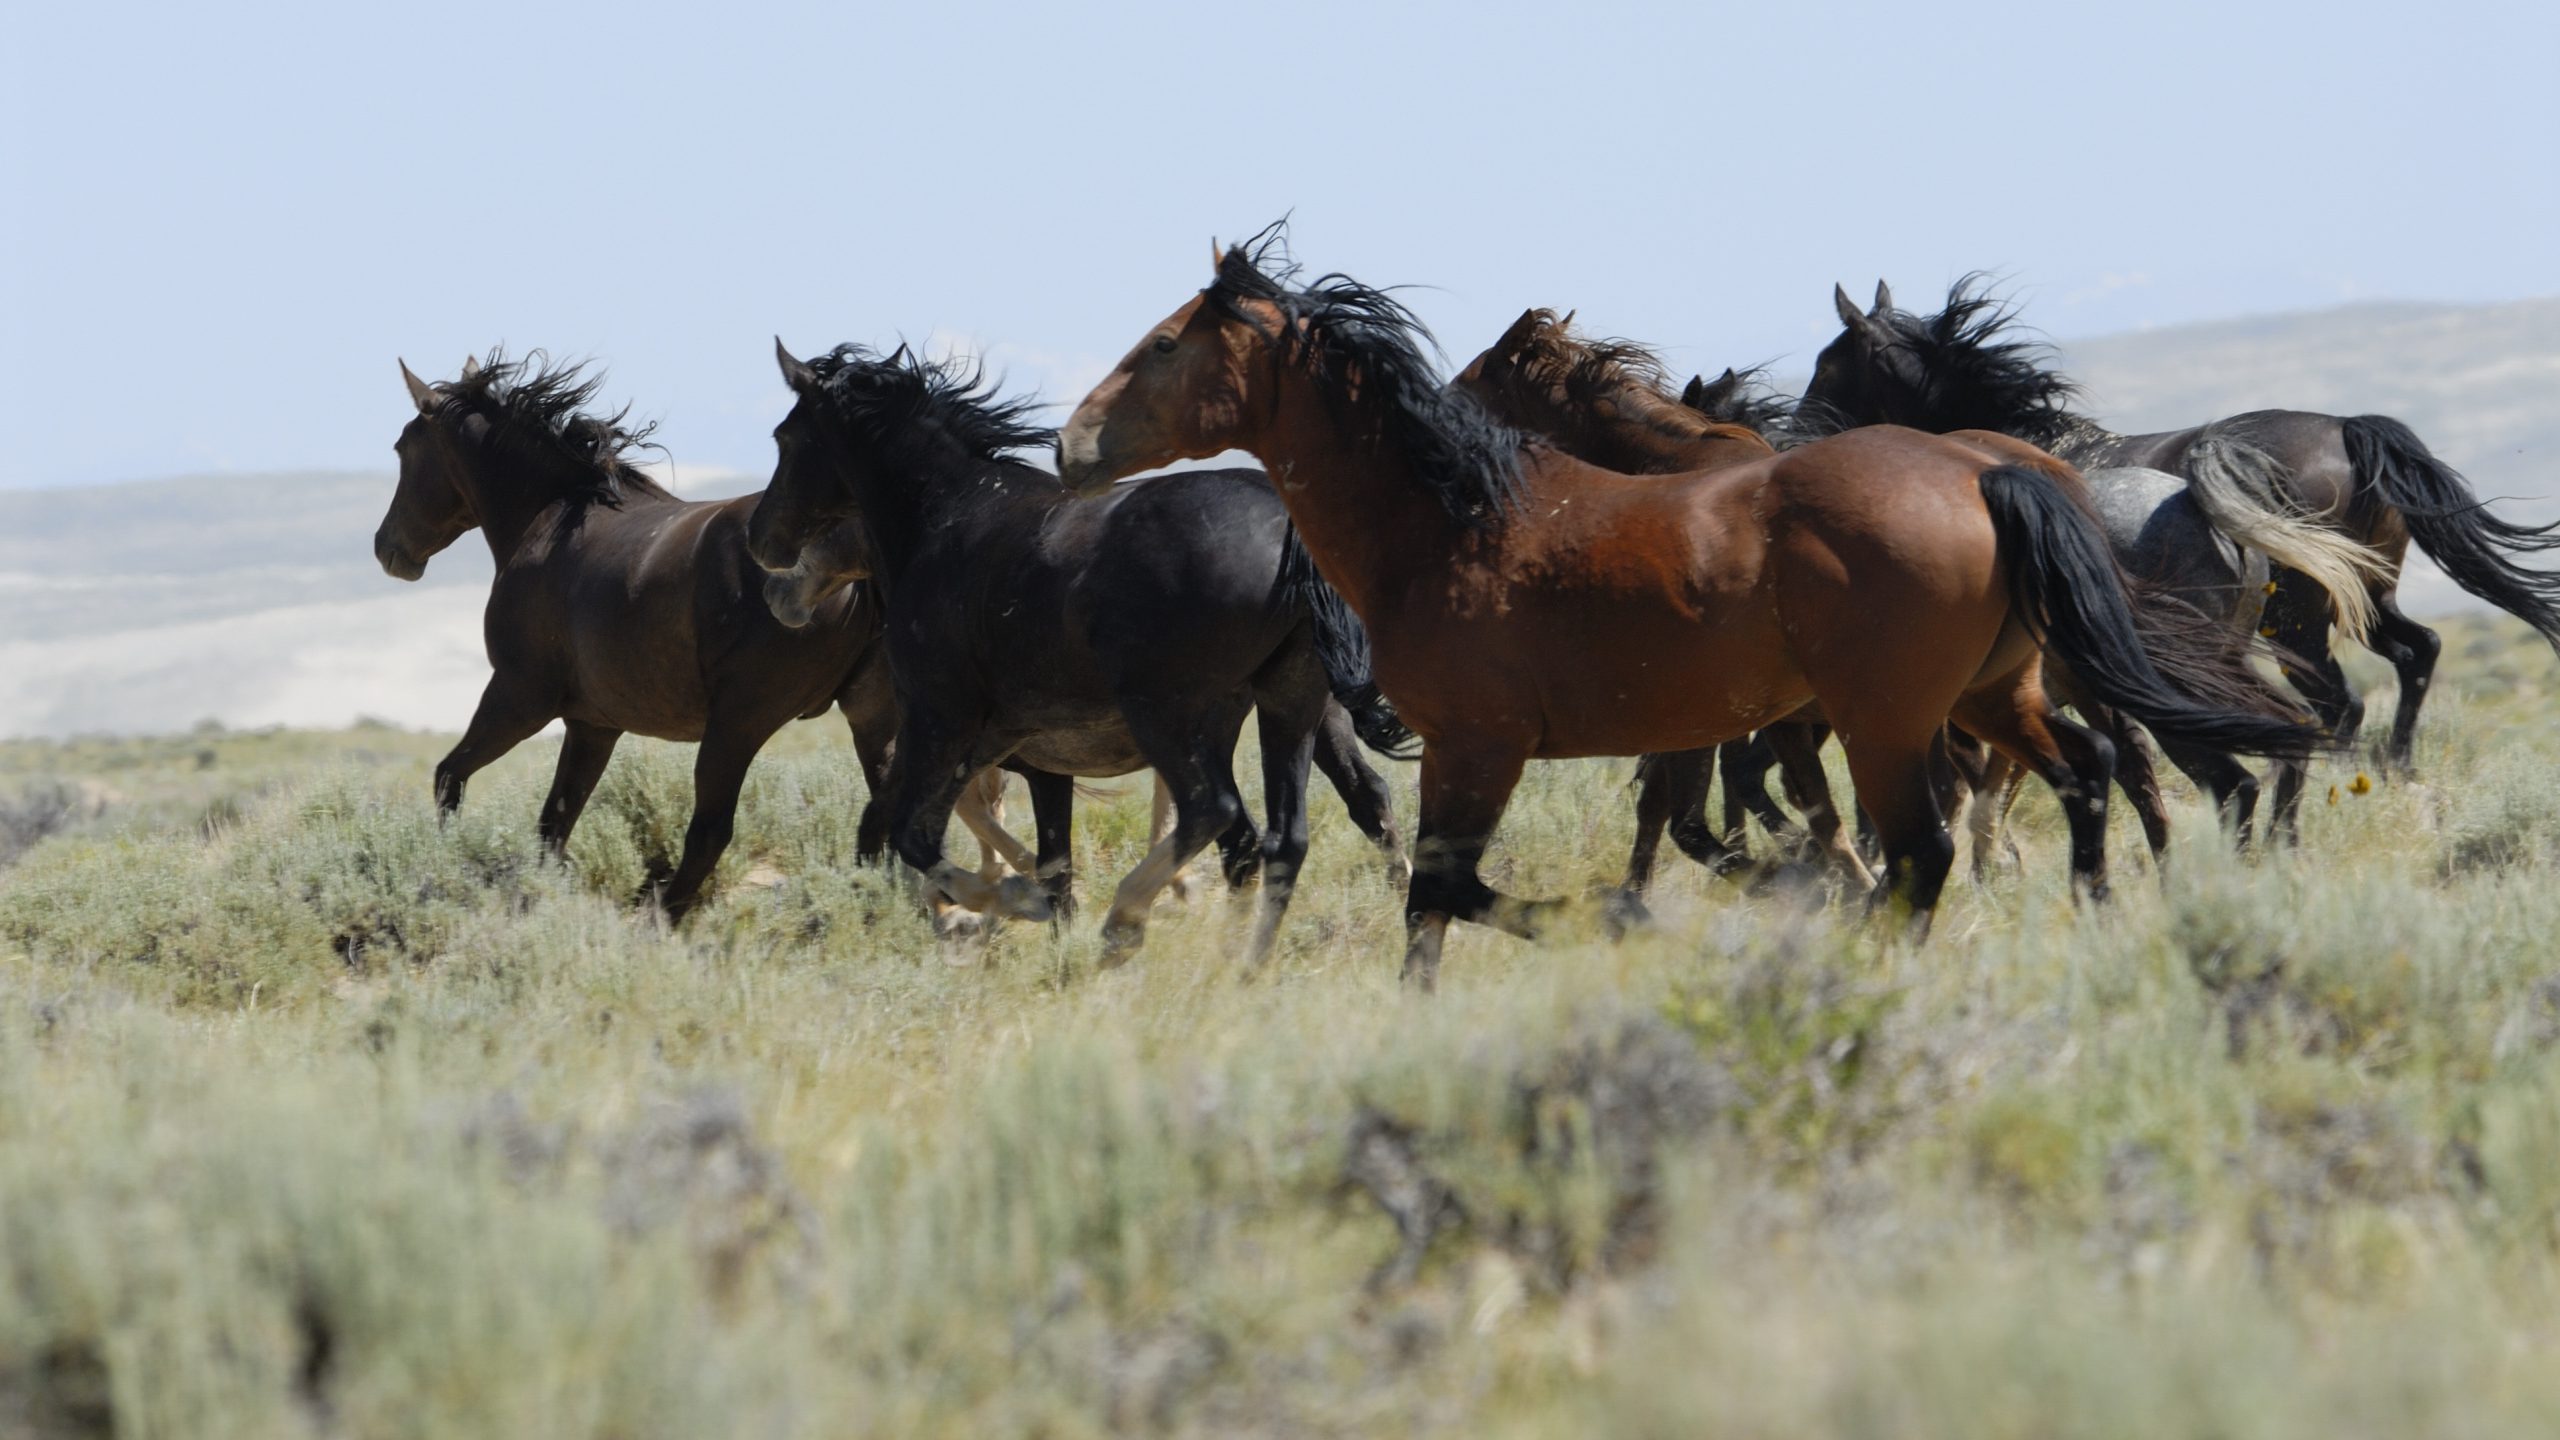 BC police investigate shooting of 17 wild horses near Walhachin